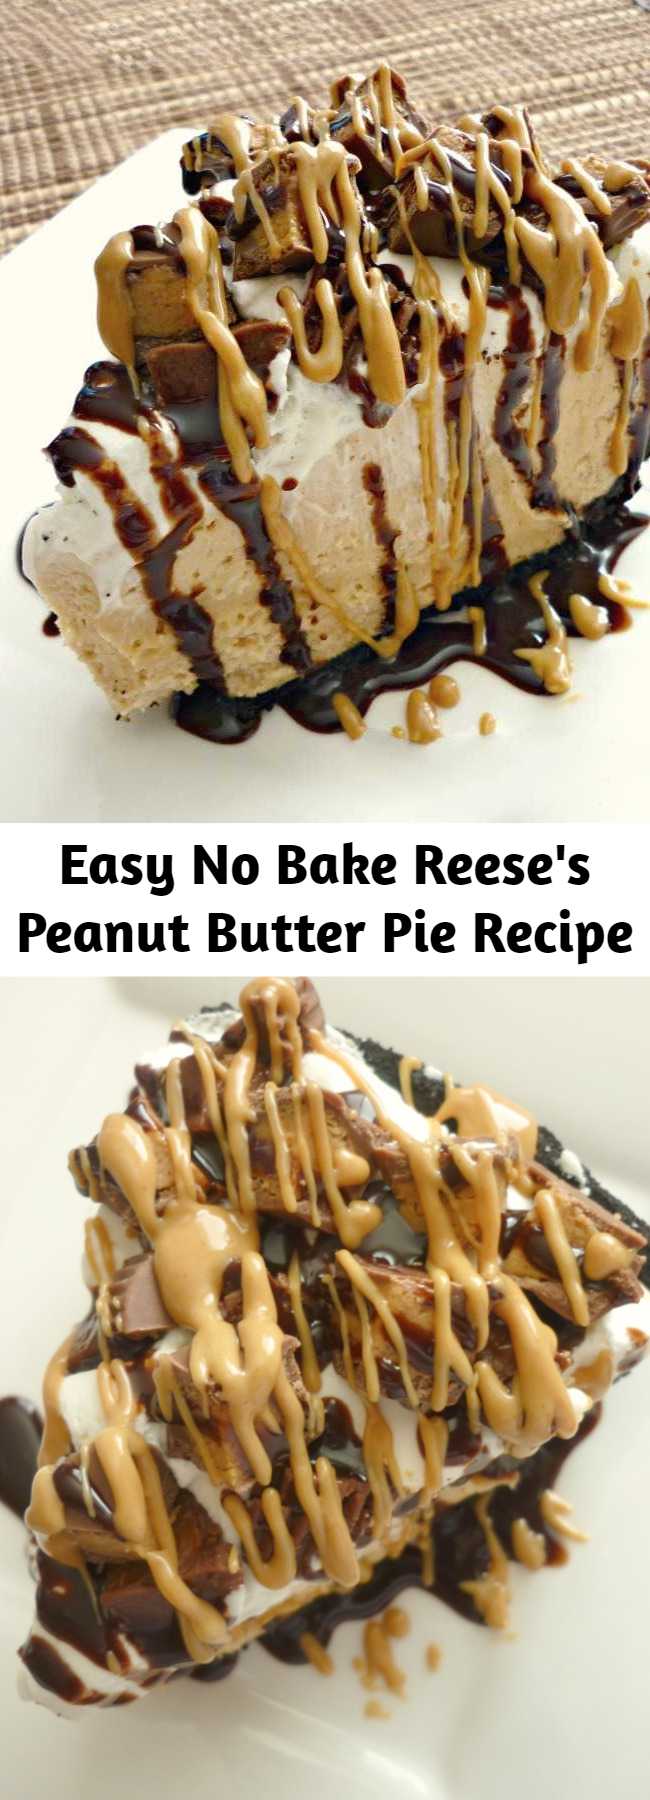 Easy No Bake Reese's Peanut Butter Pie Recipe - This Reese’s Peanut Butter Pie is sure to knock your socks off. With a delicious no-bake peanut butter cheesecake filling and topped with Reese’s Miniatures, you can’t go wrong with this easy dessert.